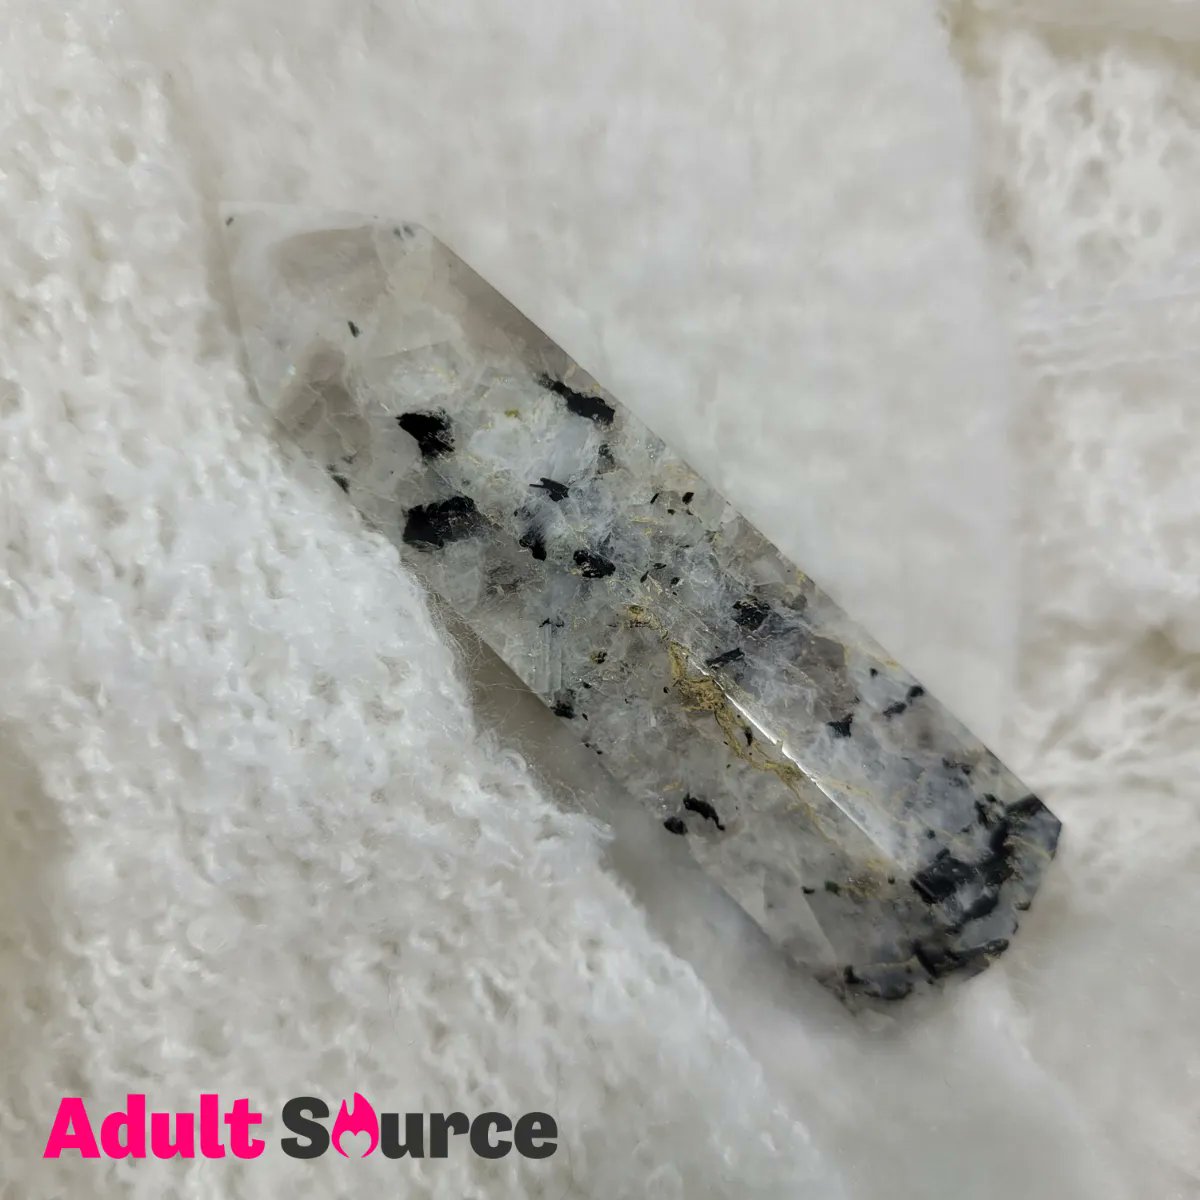 DYK Moonstone activates your creativity and intuitive feminine energy?? A MUST HAVE.
buff.ly/42jL3Mx 
#yyc #yyclife #yyclifestyle #calgary #calgarylife #lifestyle #altlifestyle #moonstone #creativity #feminine #intuition #witchyvibes #bodypositive #selflove #selfcare